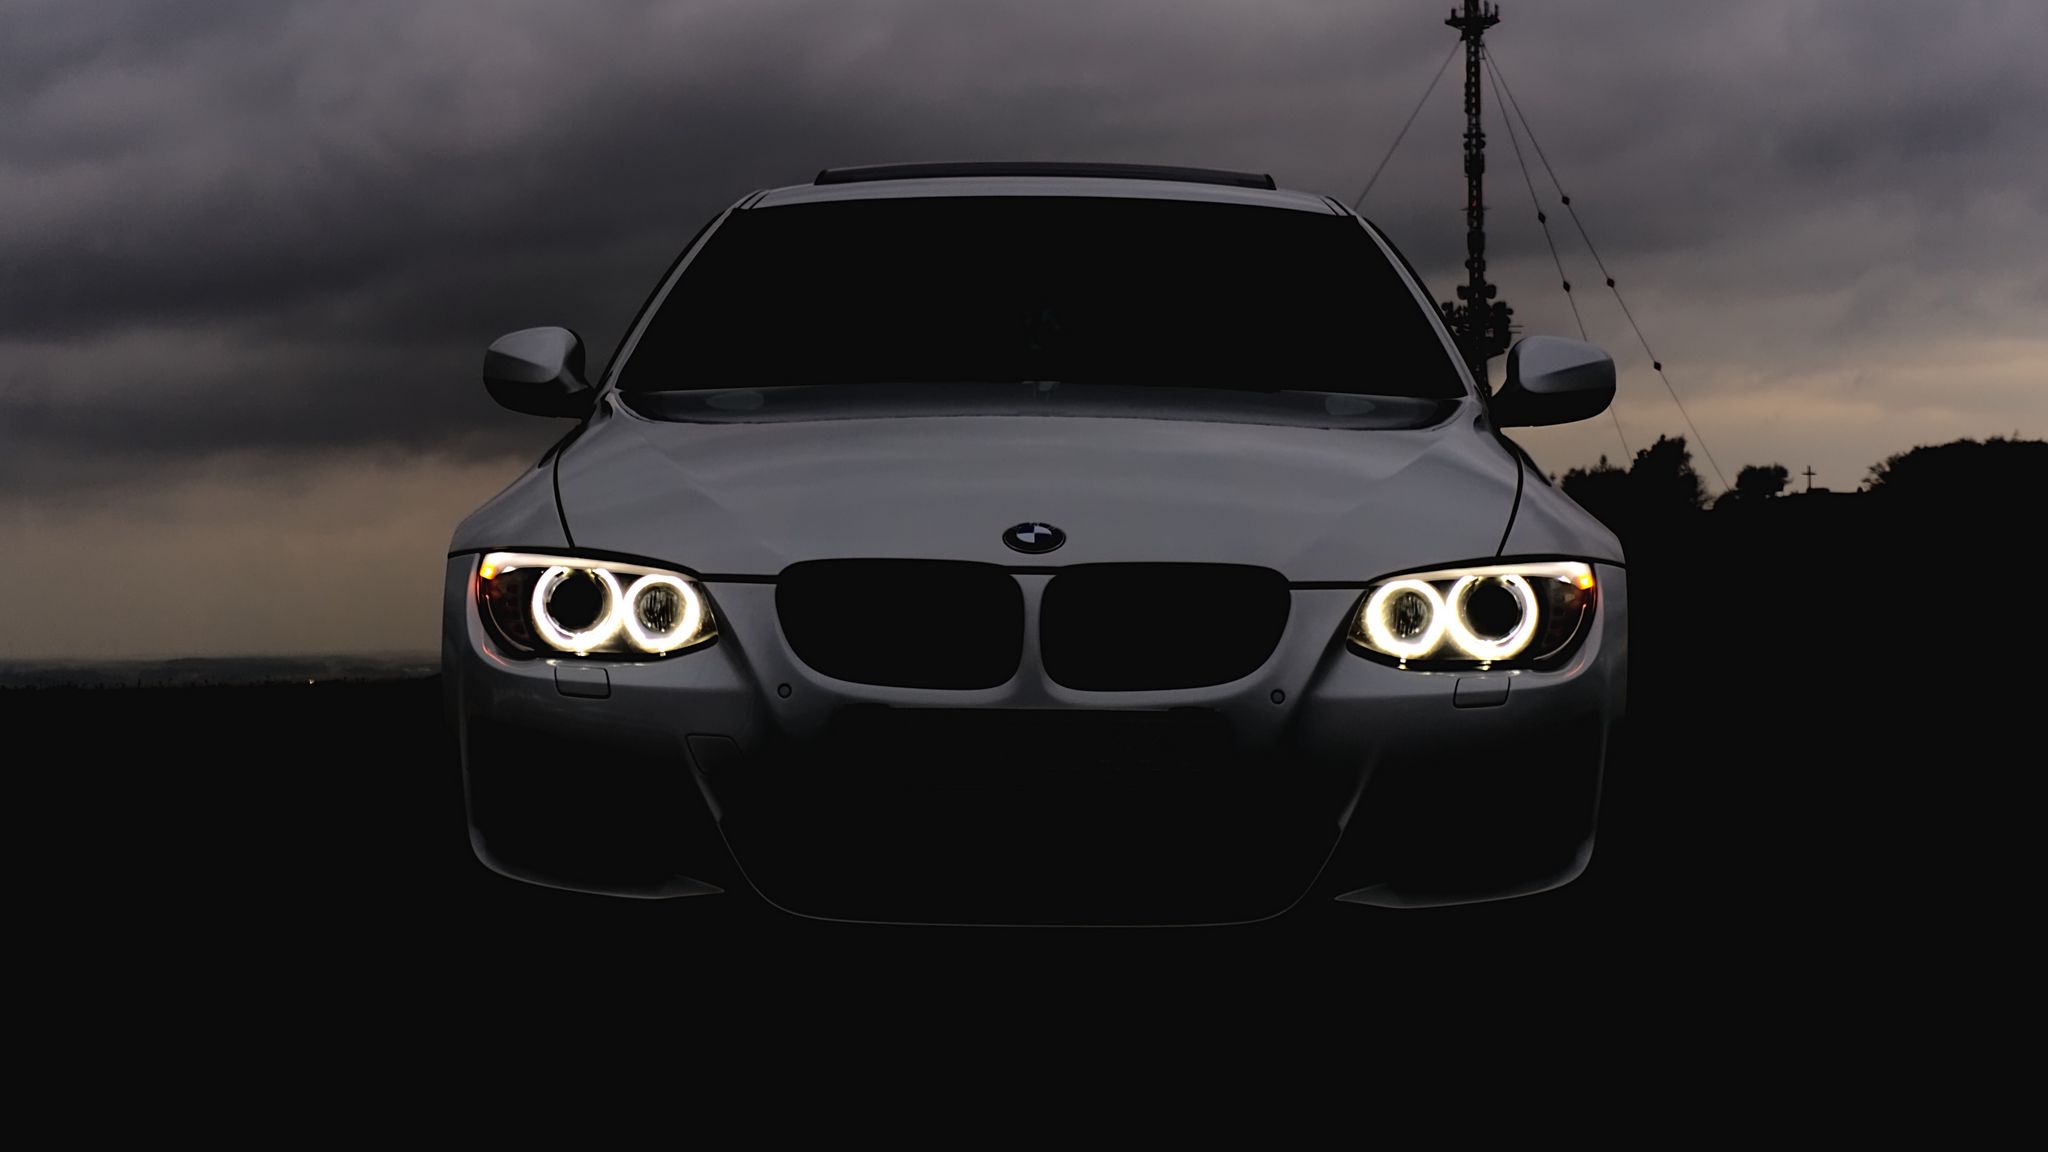 Download wallpaper 2048x1152 bmw, headlights, car, cloudy, overcast  ultrawide monitor hd background